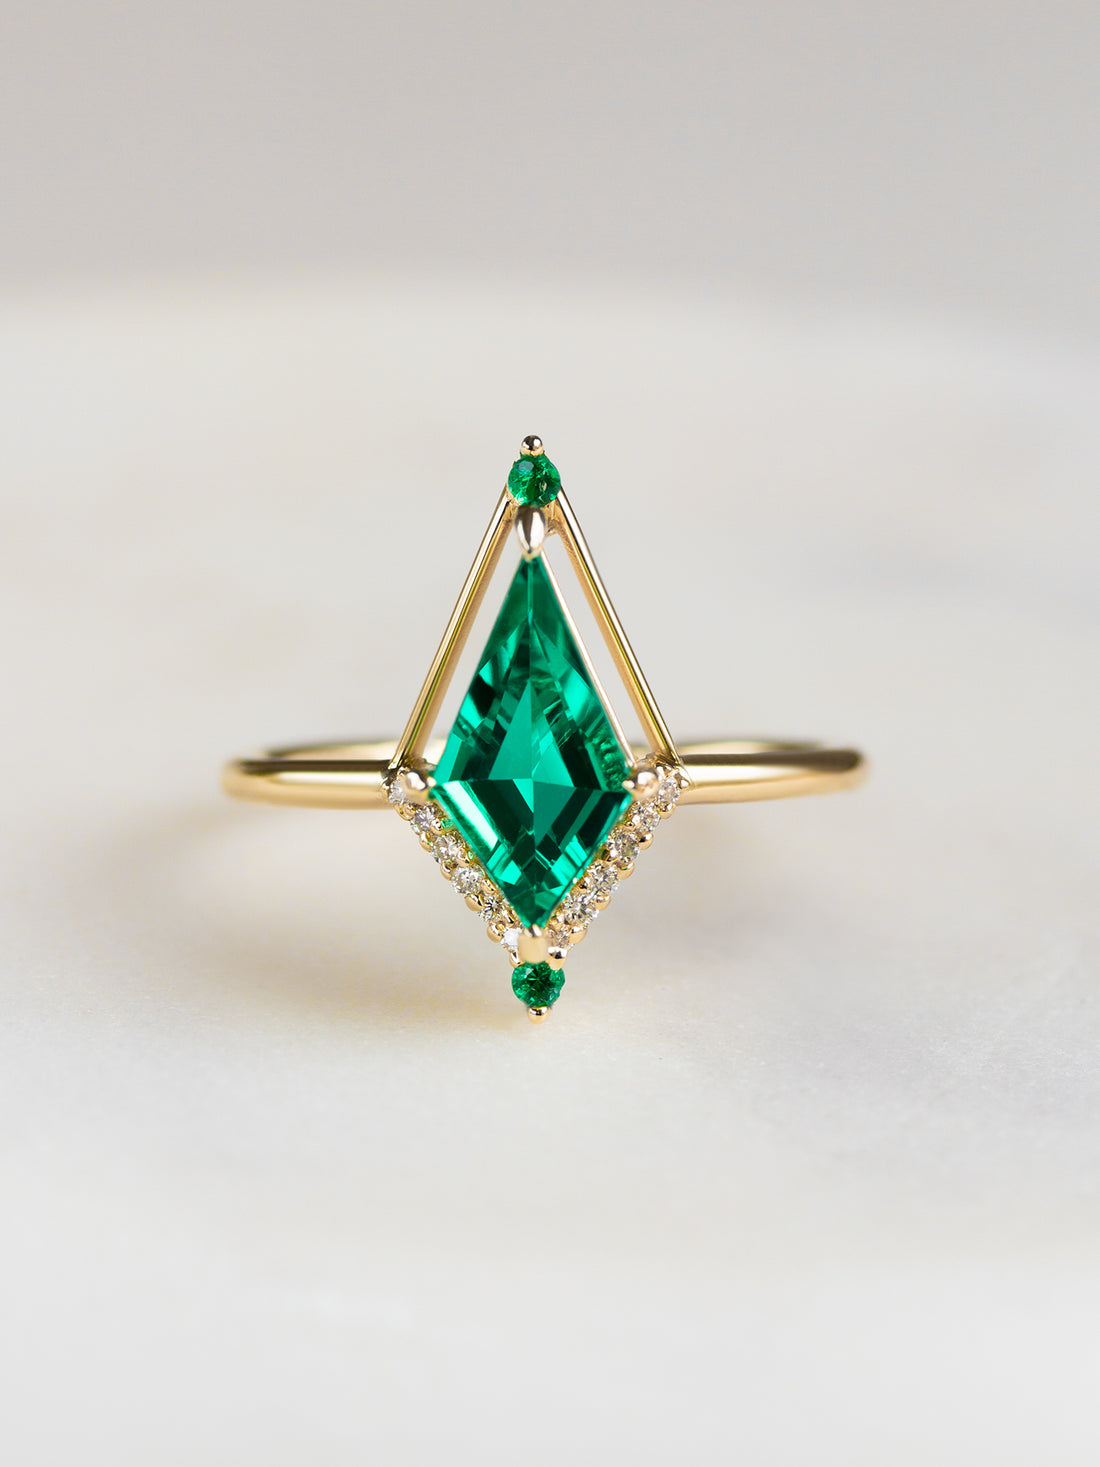 hiddenspace-engagement-ring-emerald-lucyring-diamond-proposal1